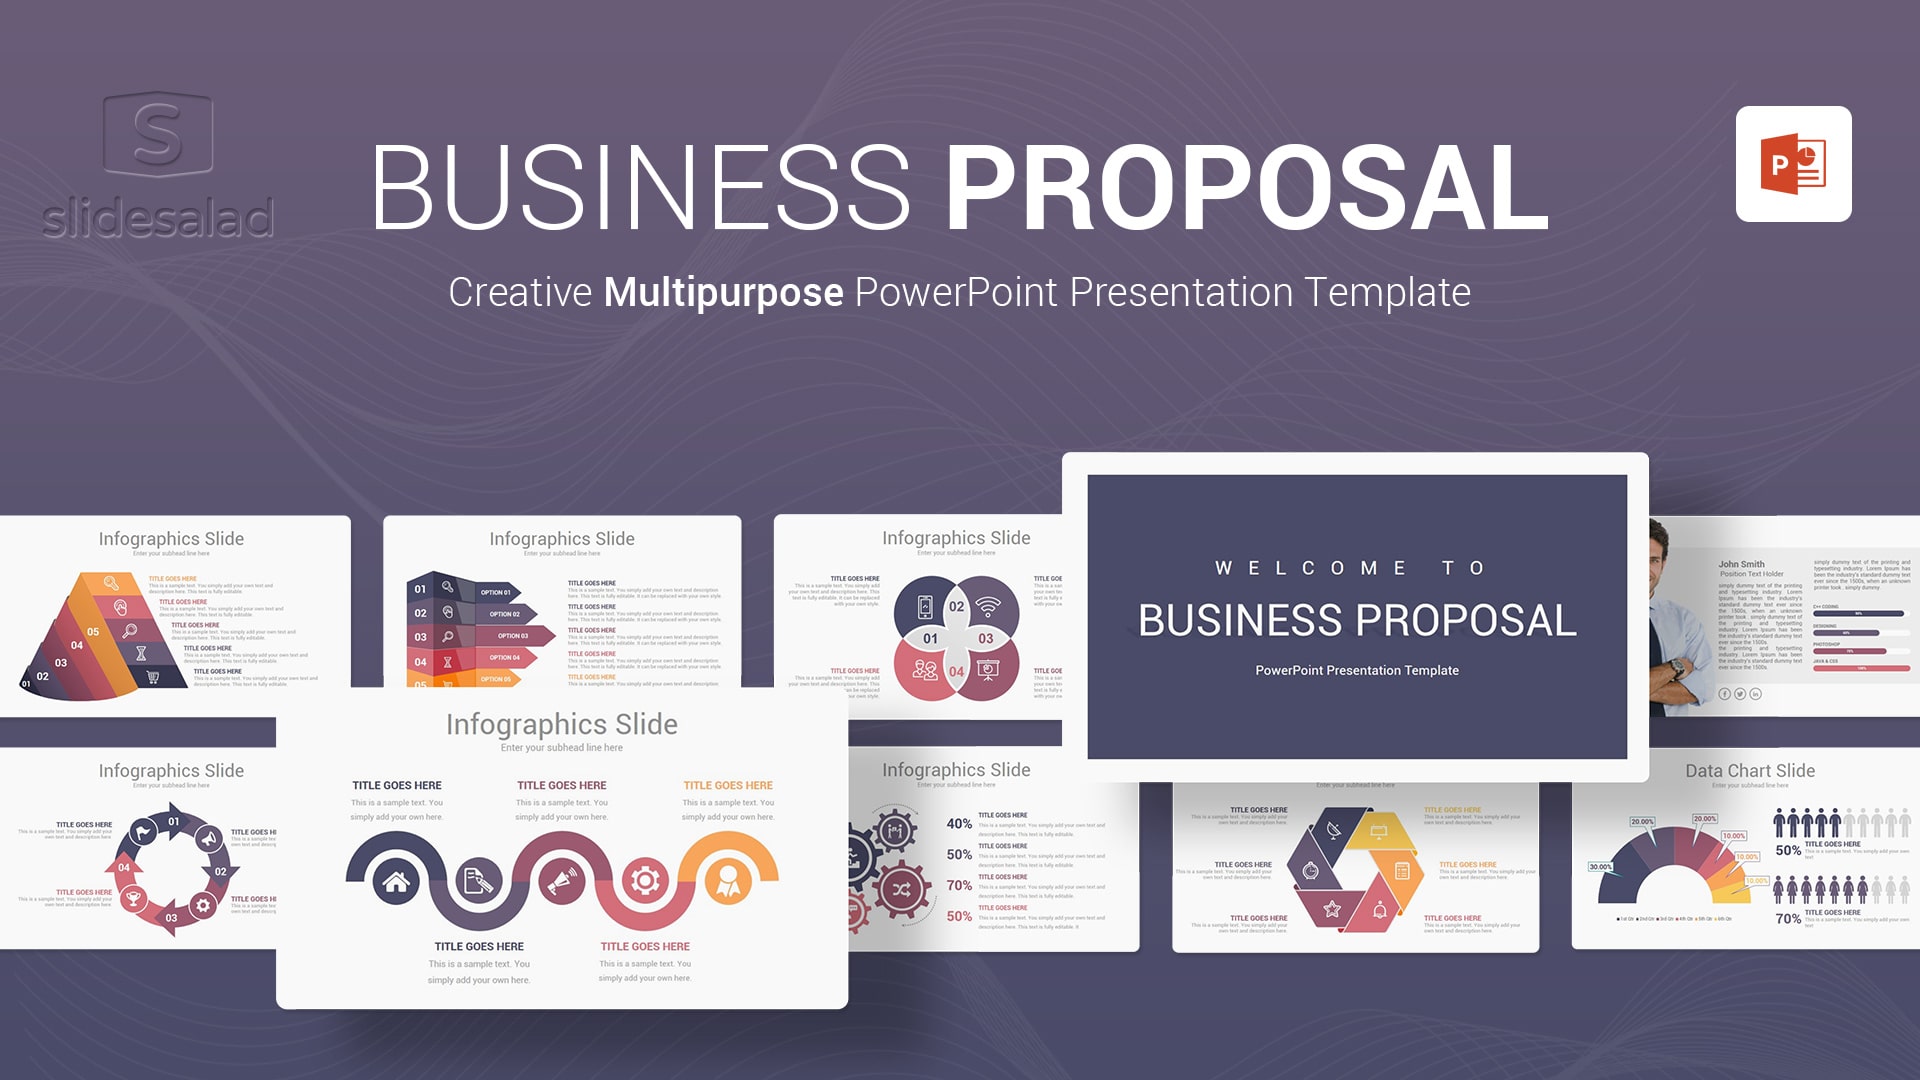 Business Proposal PowerPoint Presentation Template - Attractive and Professional Business Proposal